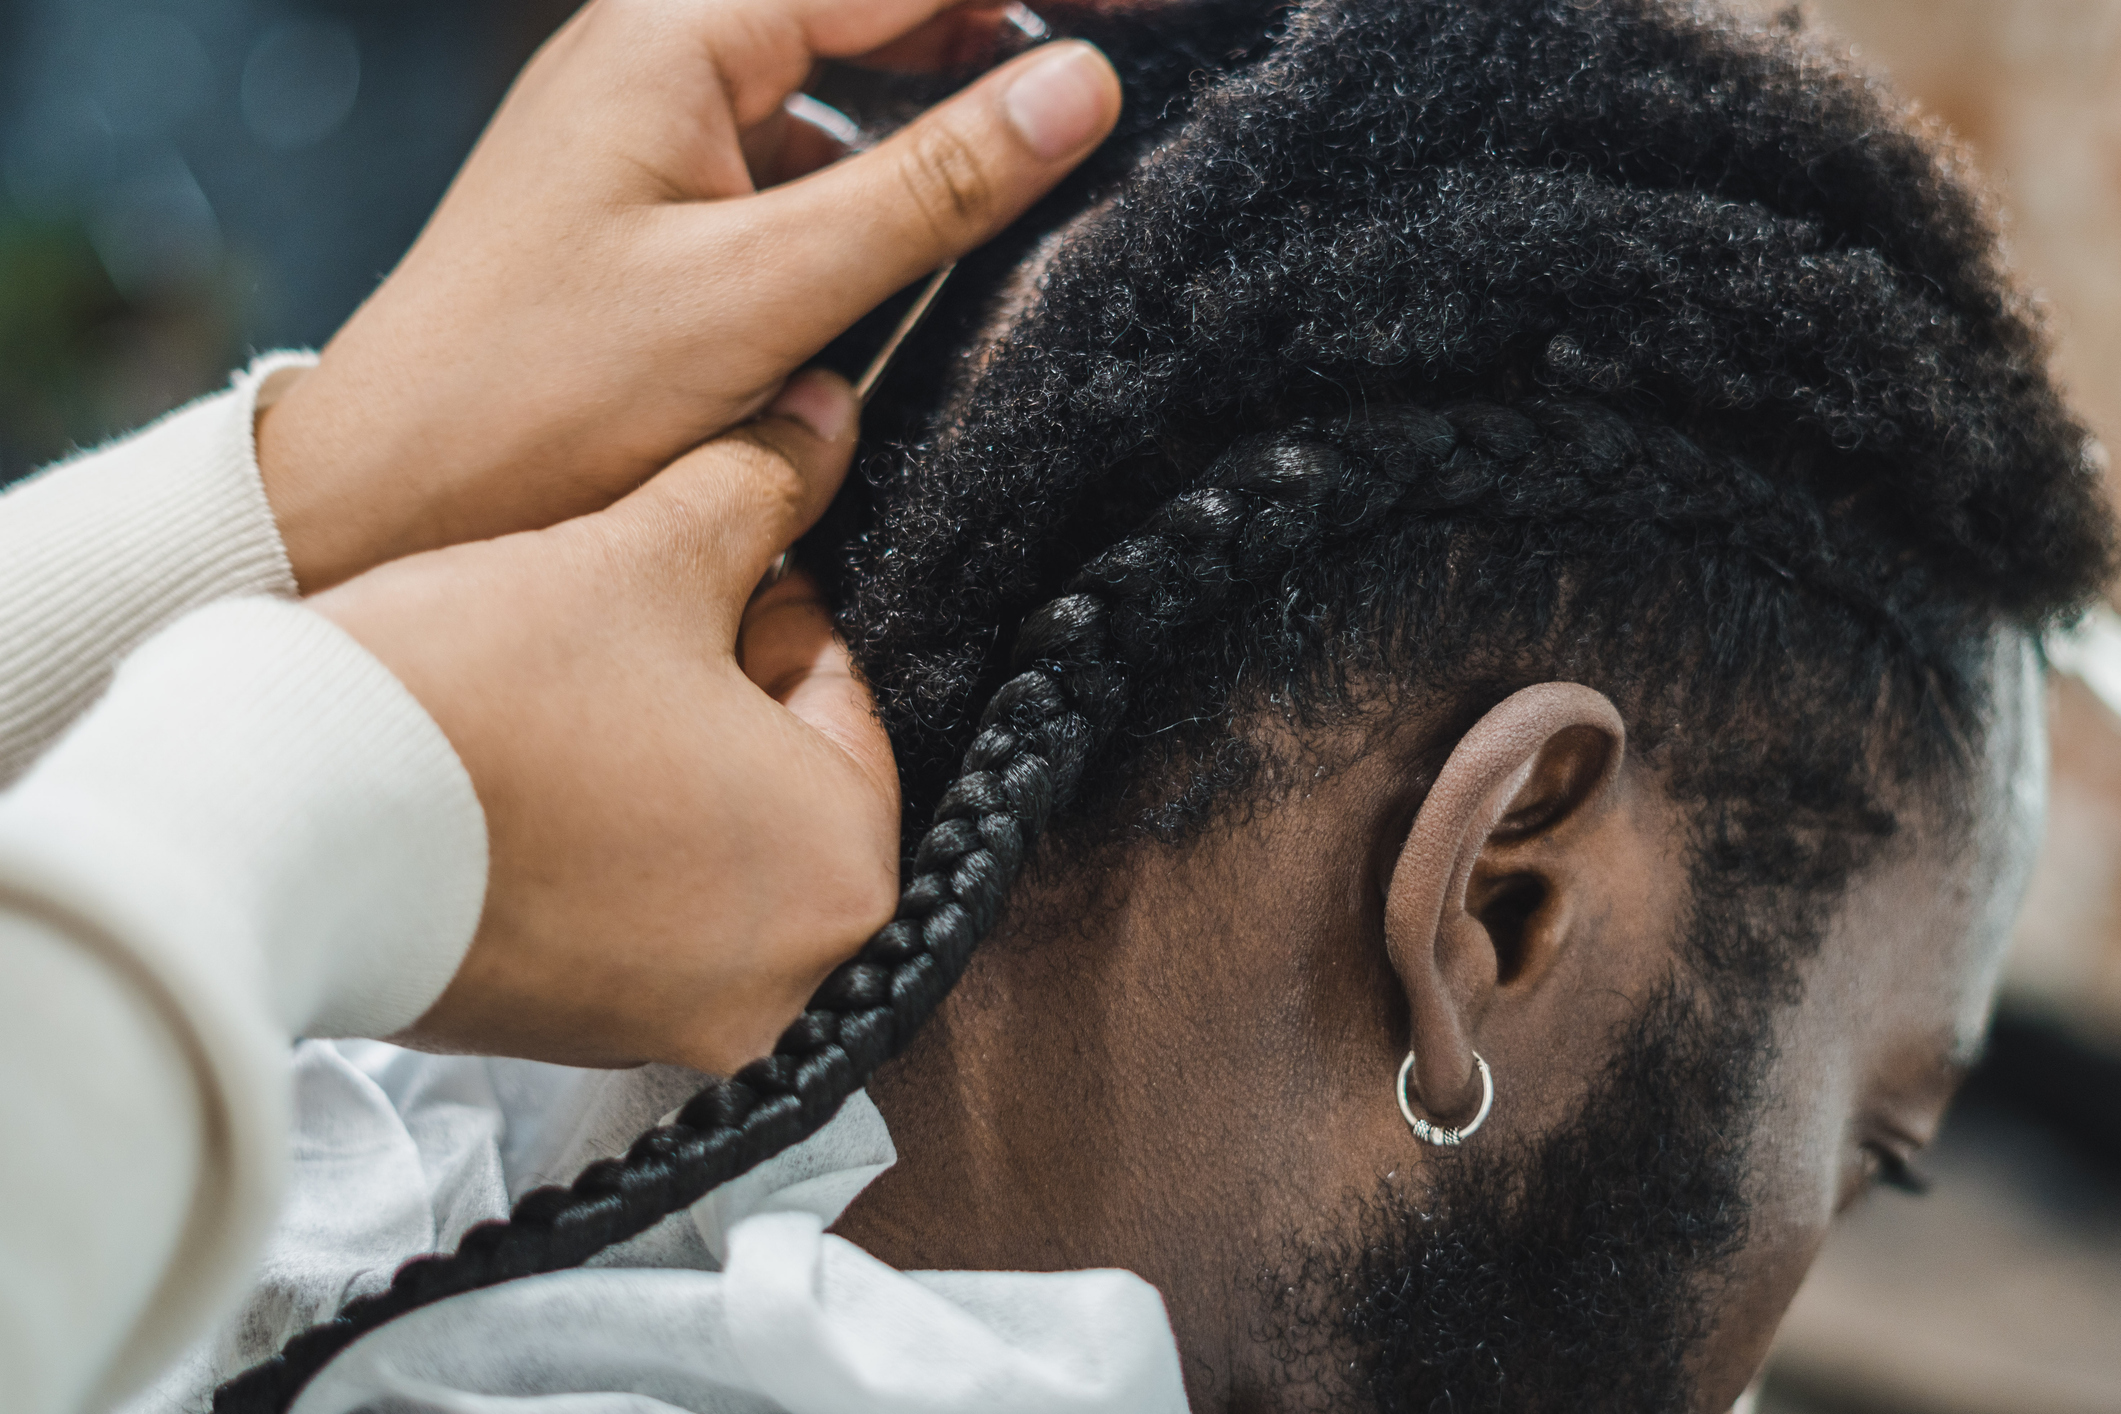 Teacher's Viral TikTok Video Showing His Students Removing His Braids In Classroom Sparks Discourse